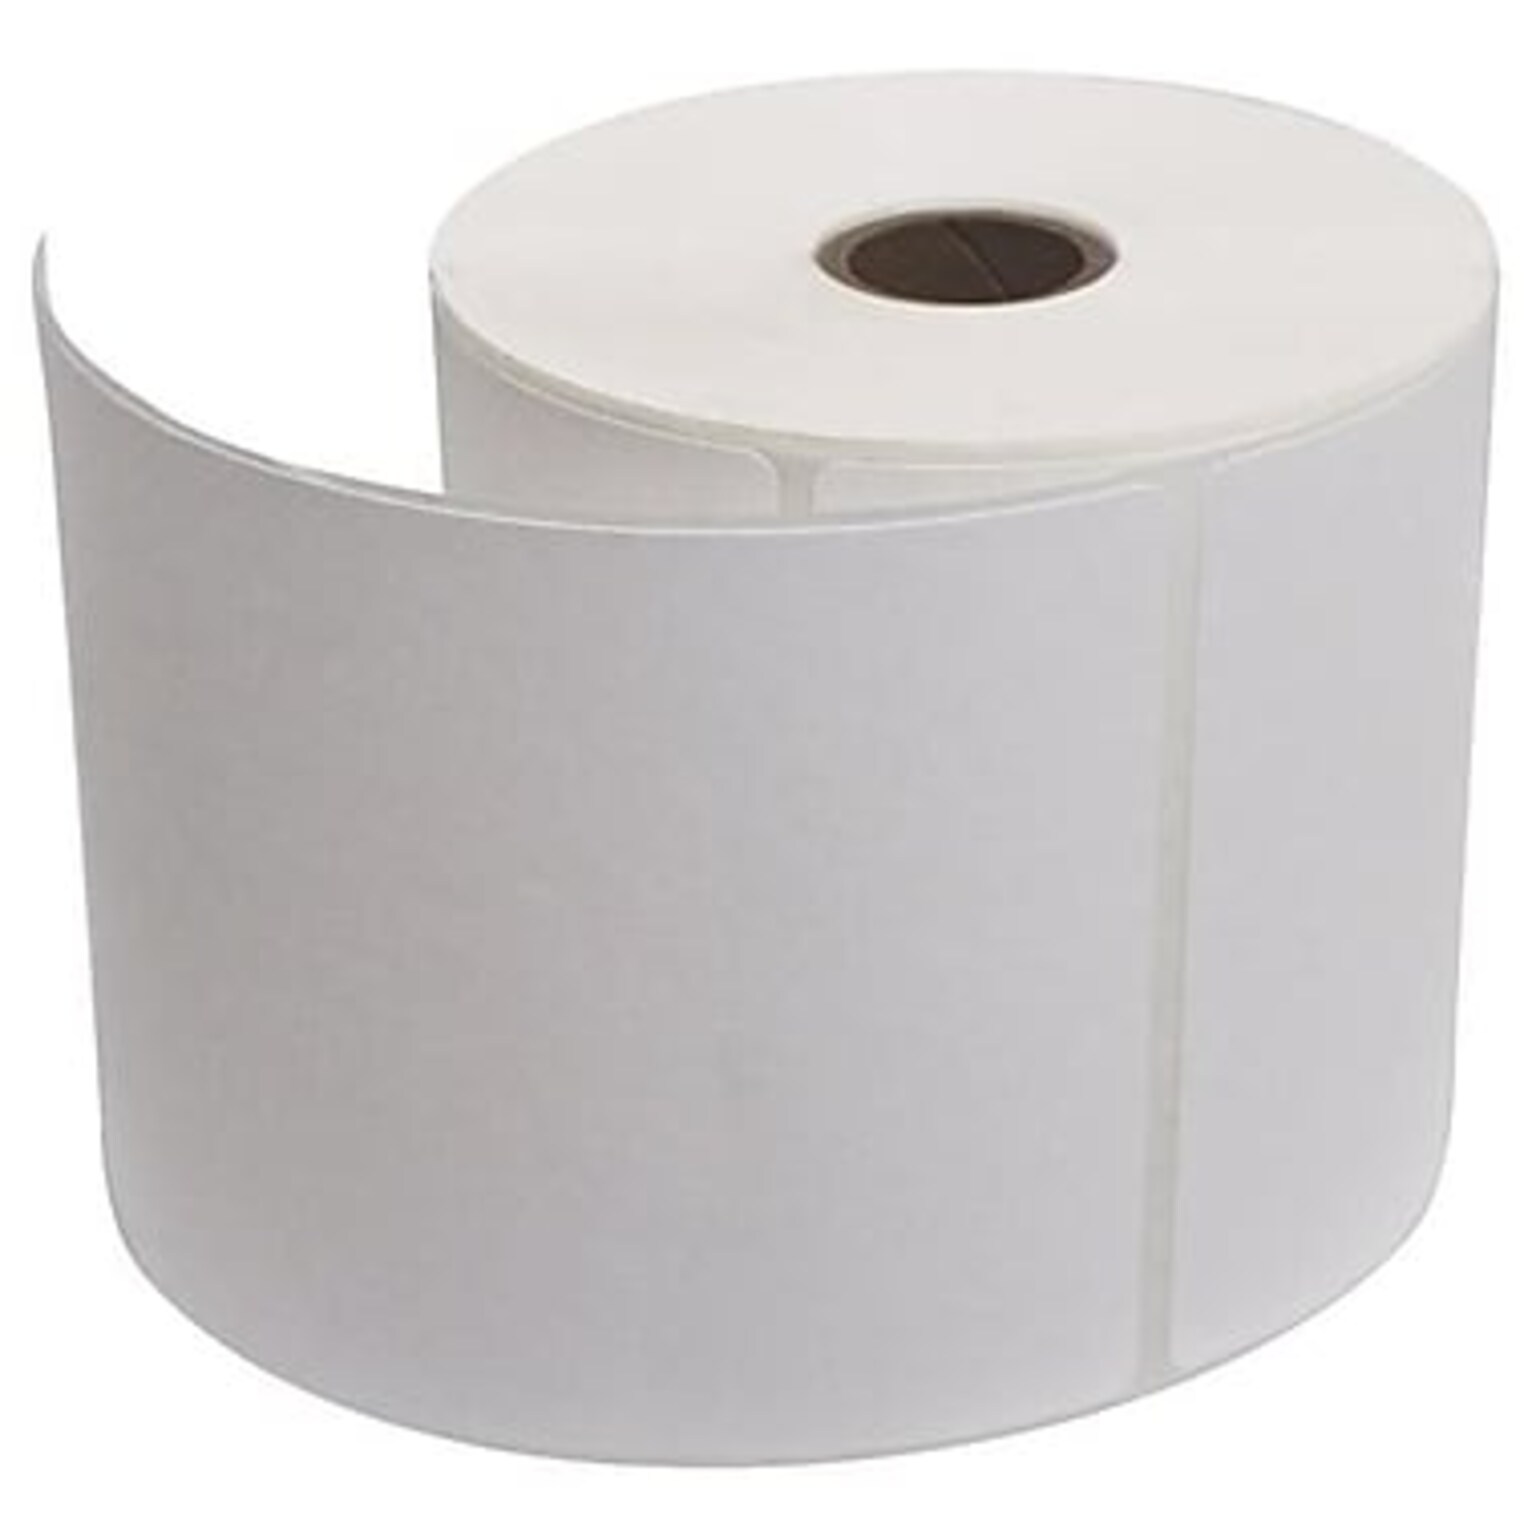 Vangoddy Industrial Thermal Labels, 4 x 6, White, 250 Labels/Roll, 16 Rolls/Pack, 4000 Labels/Box(PT_000000932)